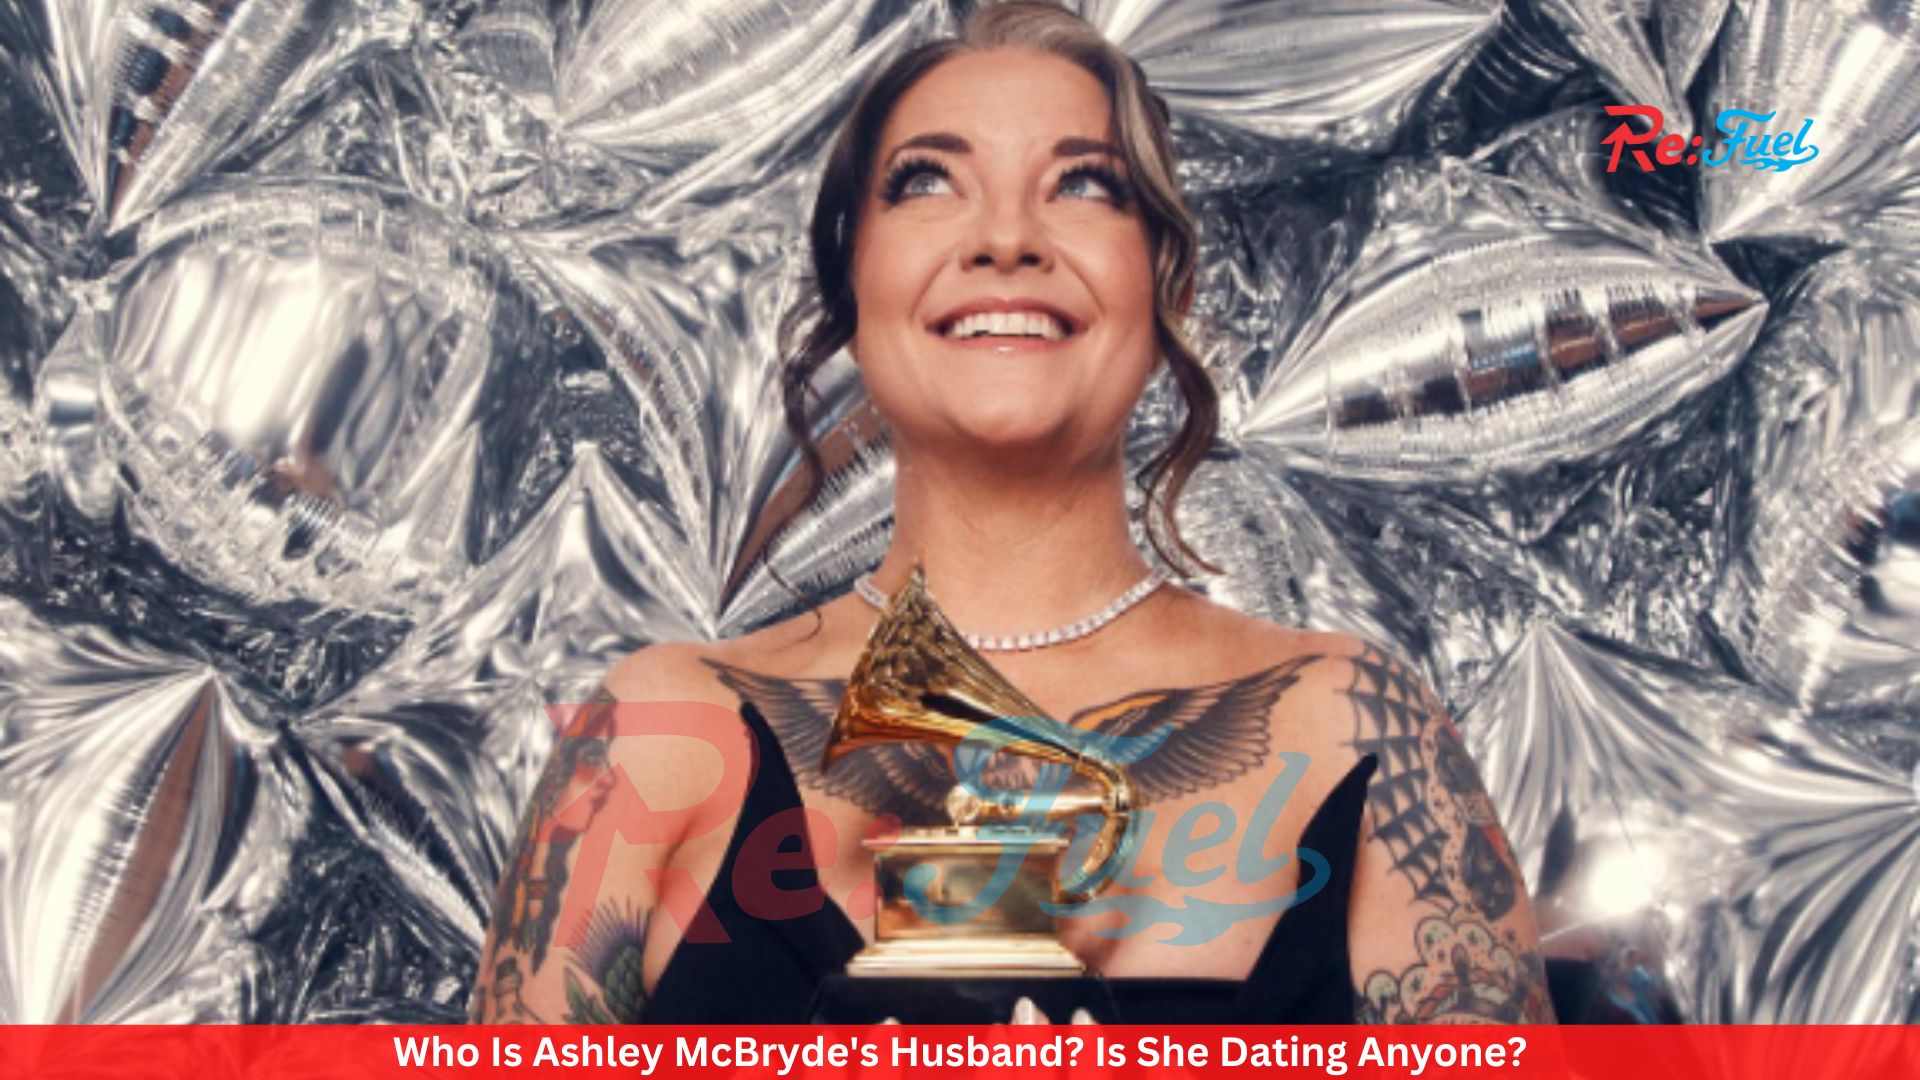 Who Is Ashley McBryde's Husband? Is She Dating Anyone?